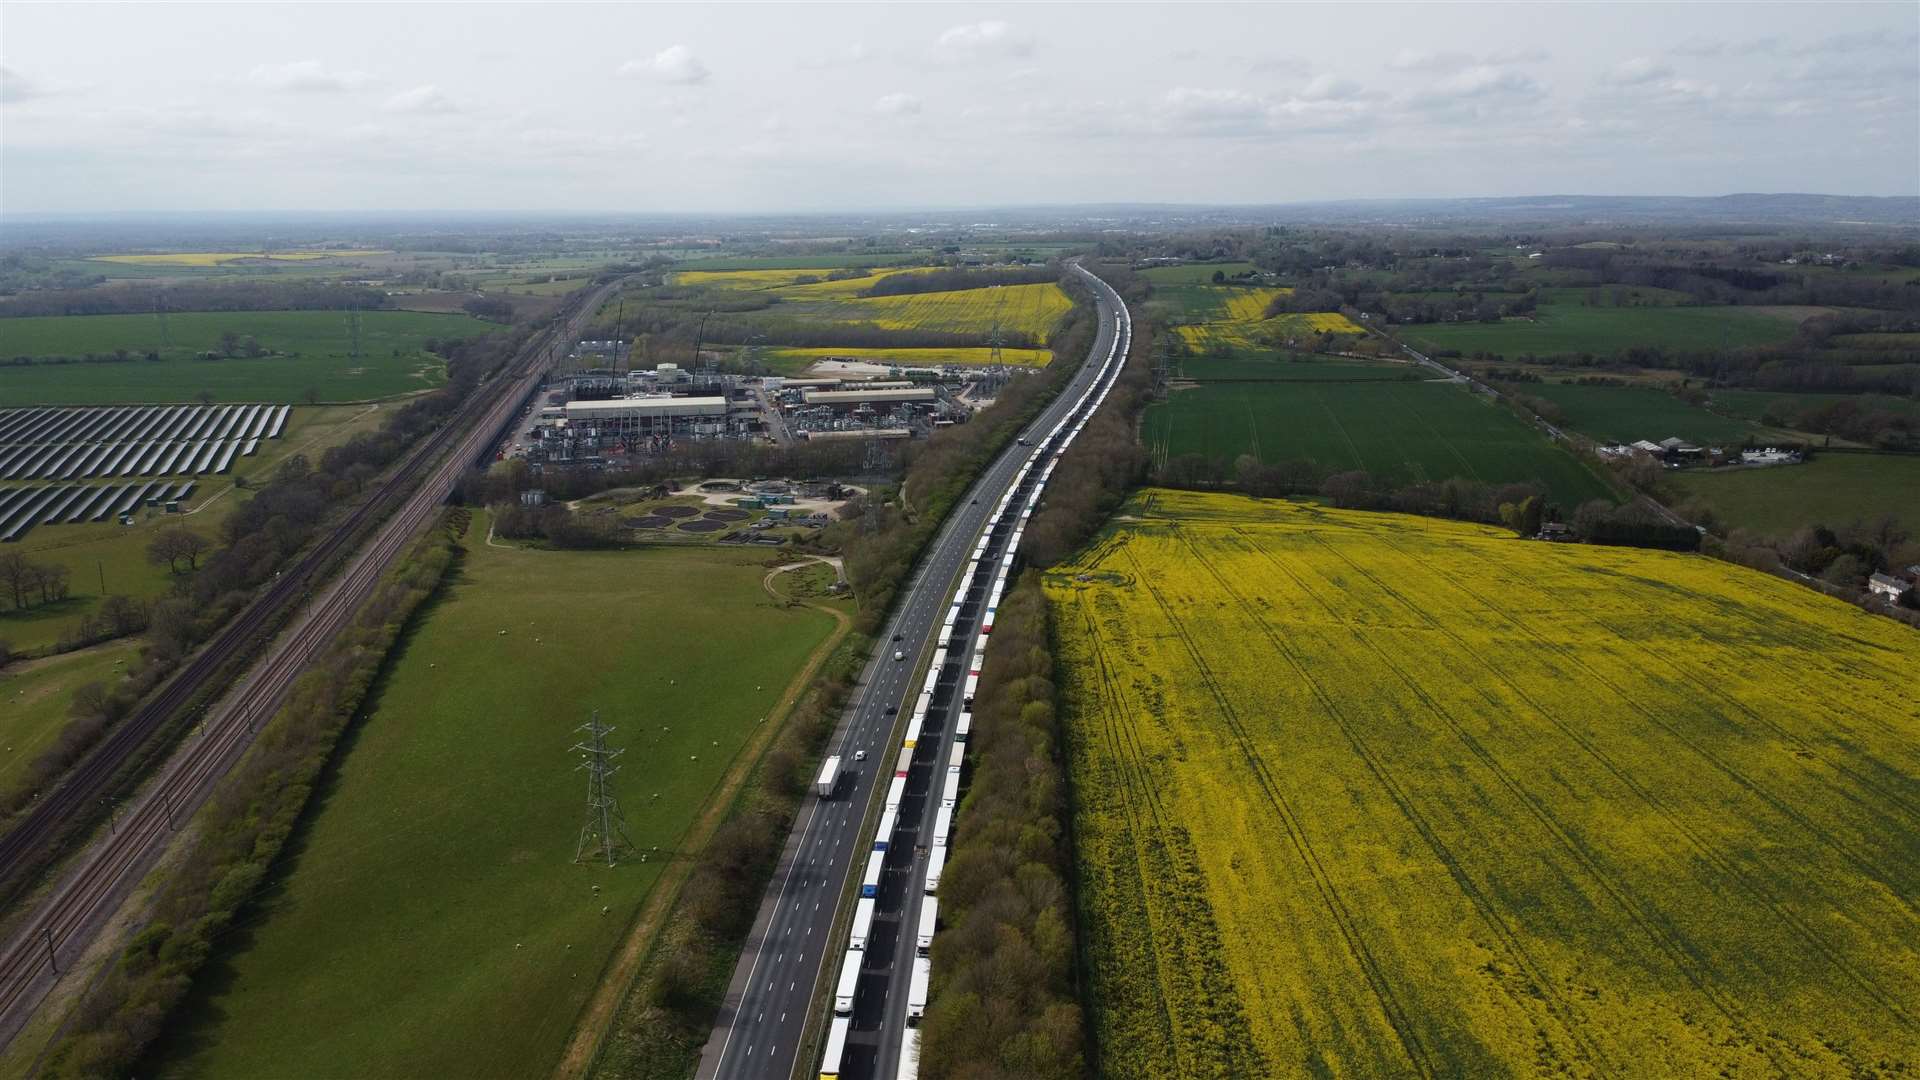 Lorries queue on the M20 motorway in Kent, near Sellindge, as part of Operation Brock earlier this month. Picture: Barry Goodwin